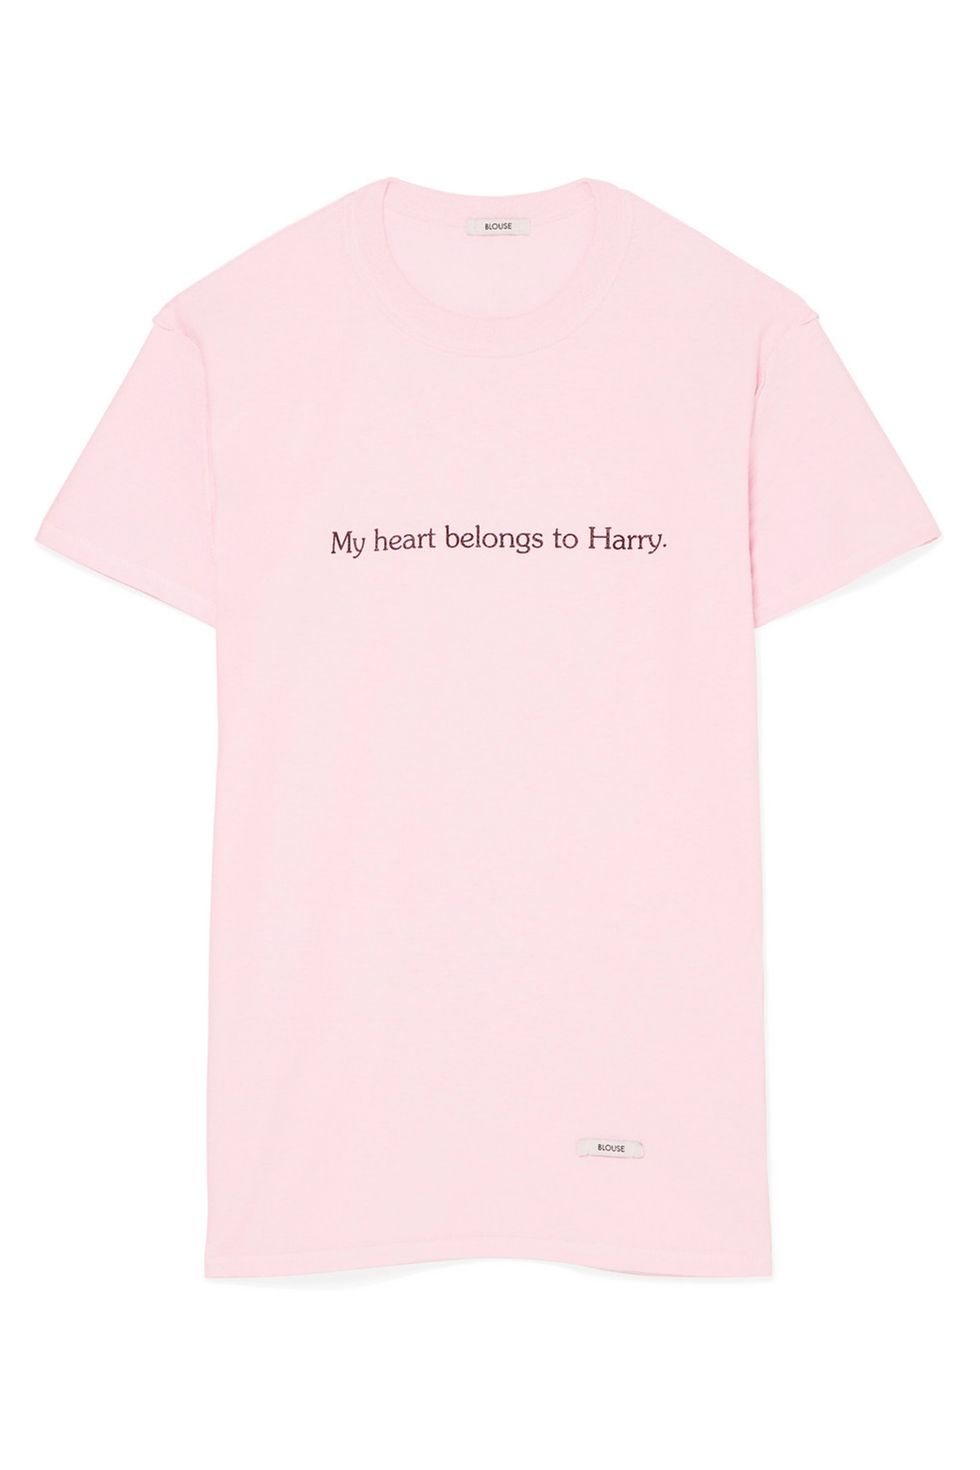 T-shirt, Clothing, Pink, White, Text, Product, Sleeve, Top, Active shirt, Font, 